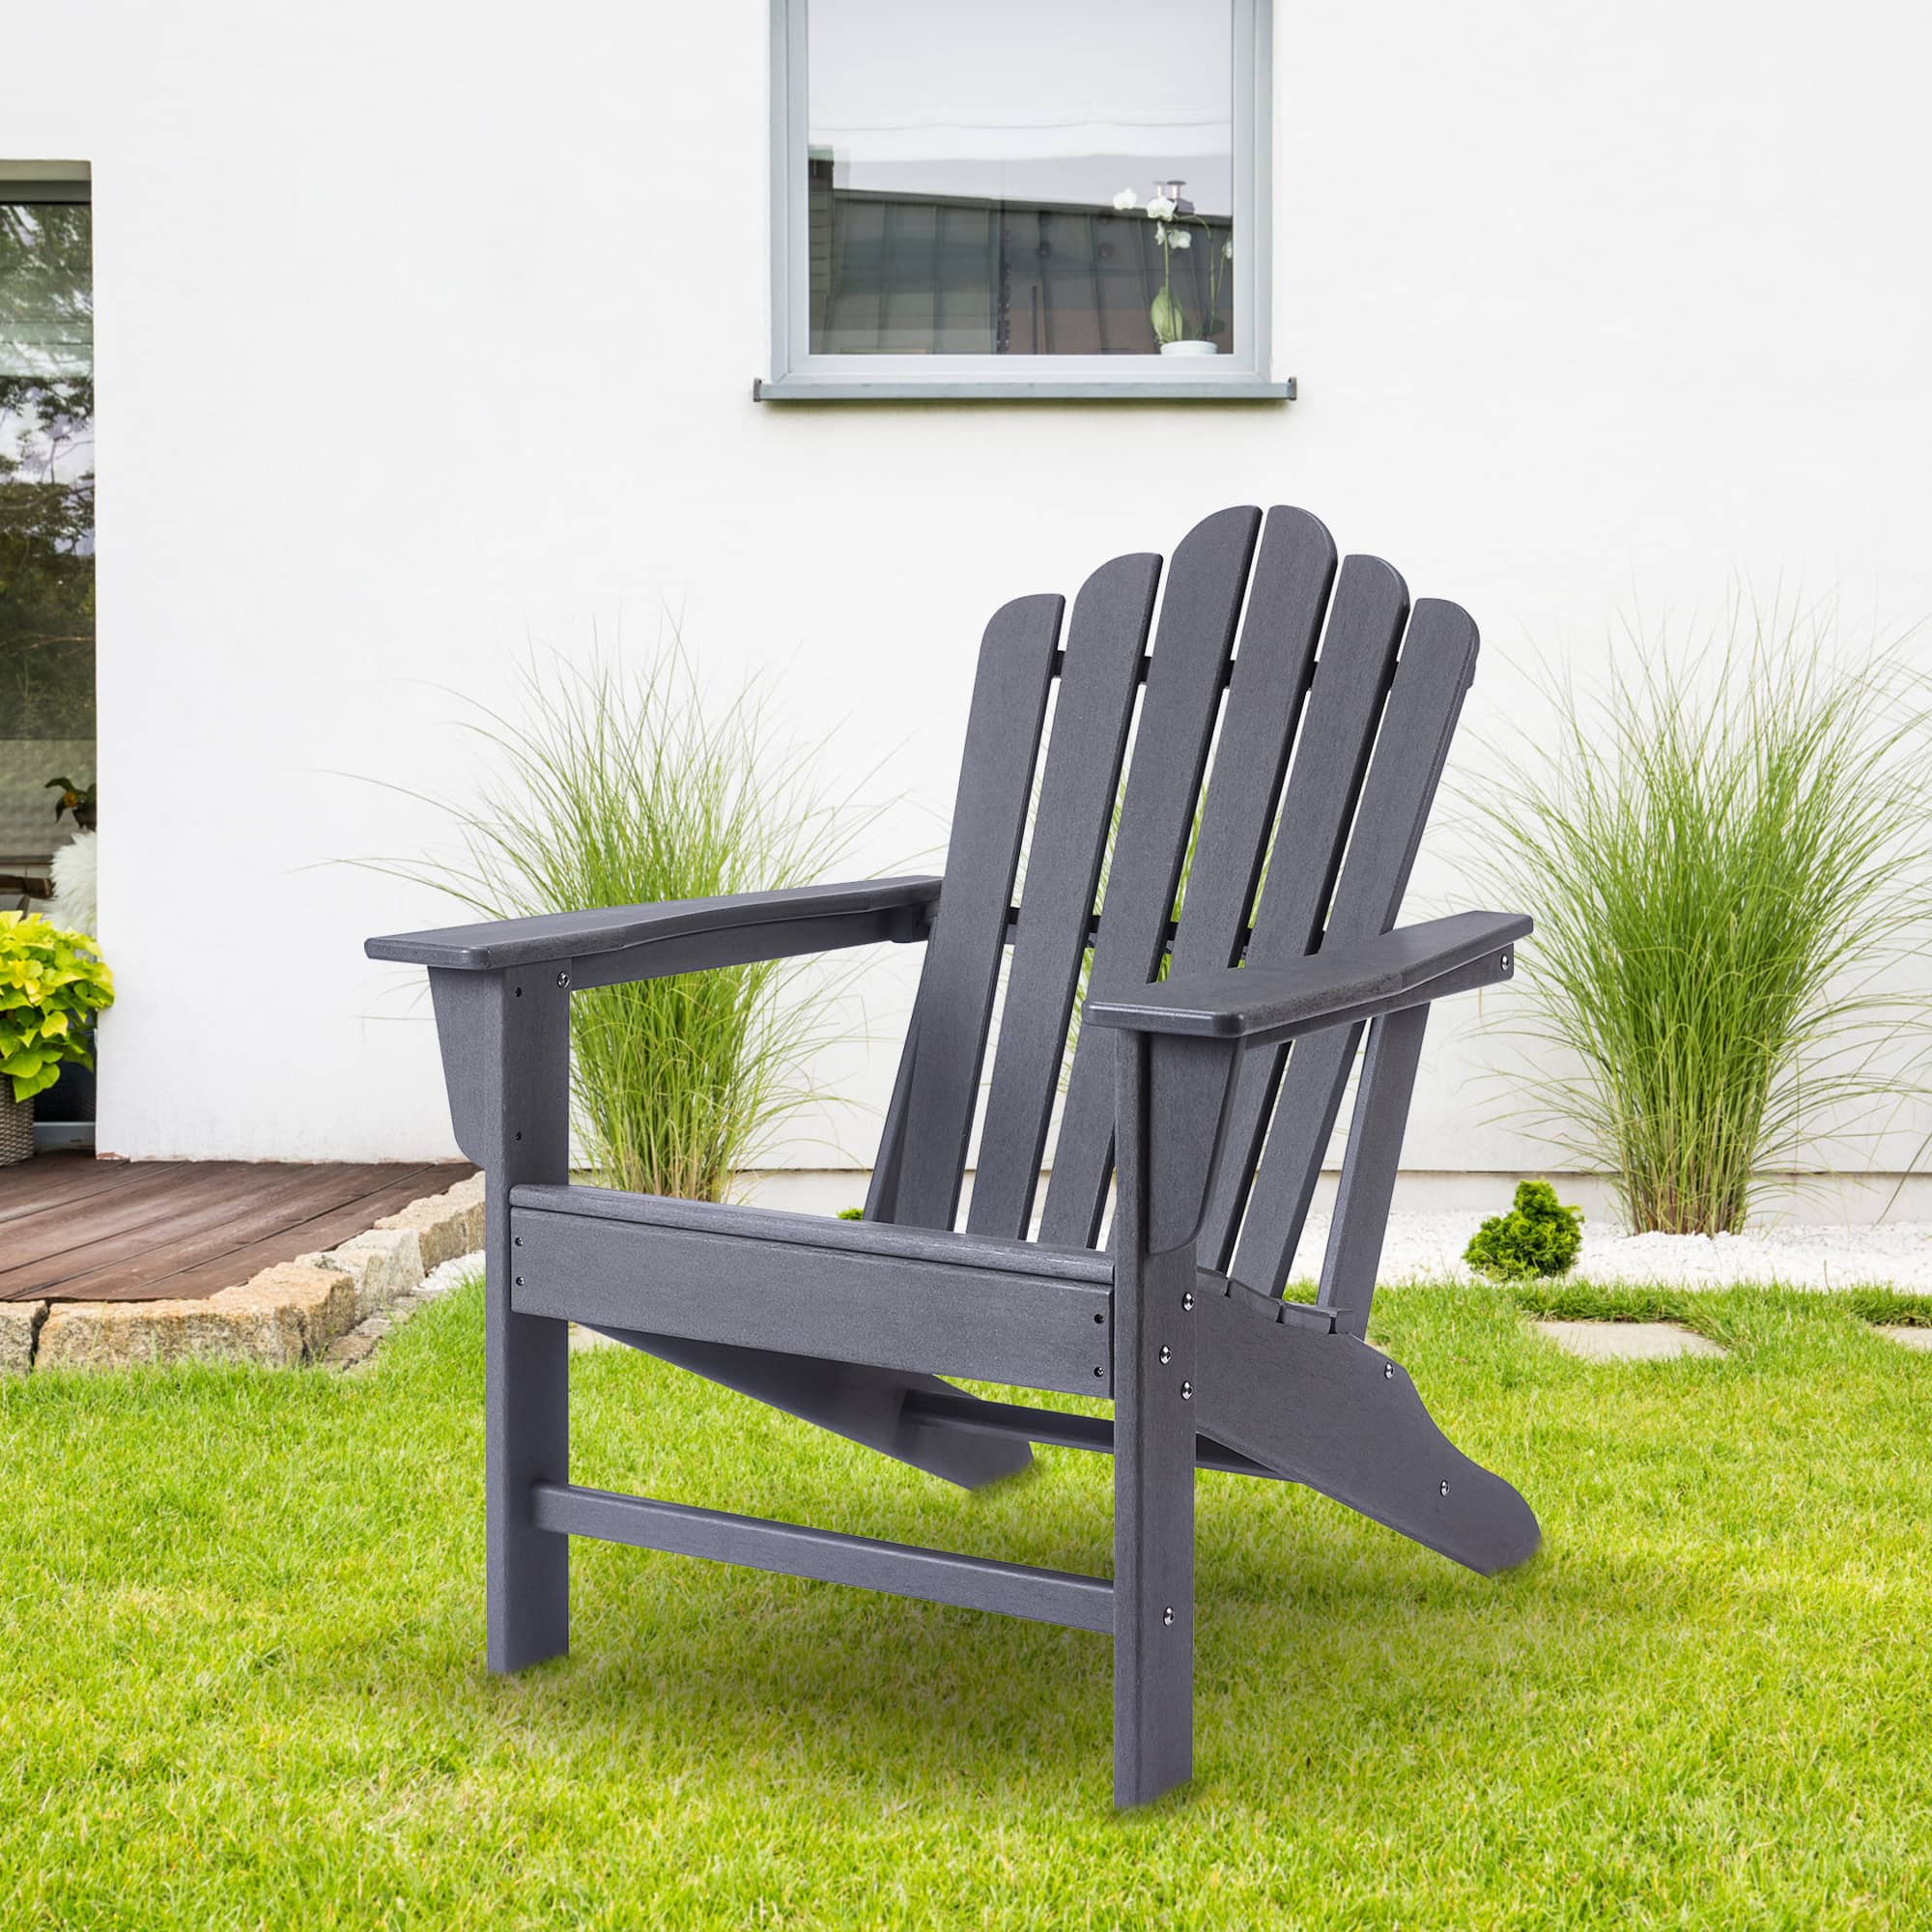 Clihome Classic Outdoor Adirondack Chair for Garden Porch Patio Deck Backyard, Weather Resistant Accent Furniture